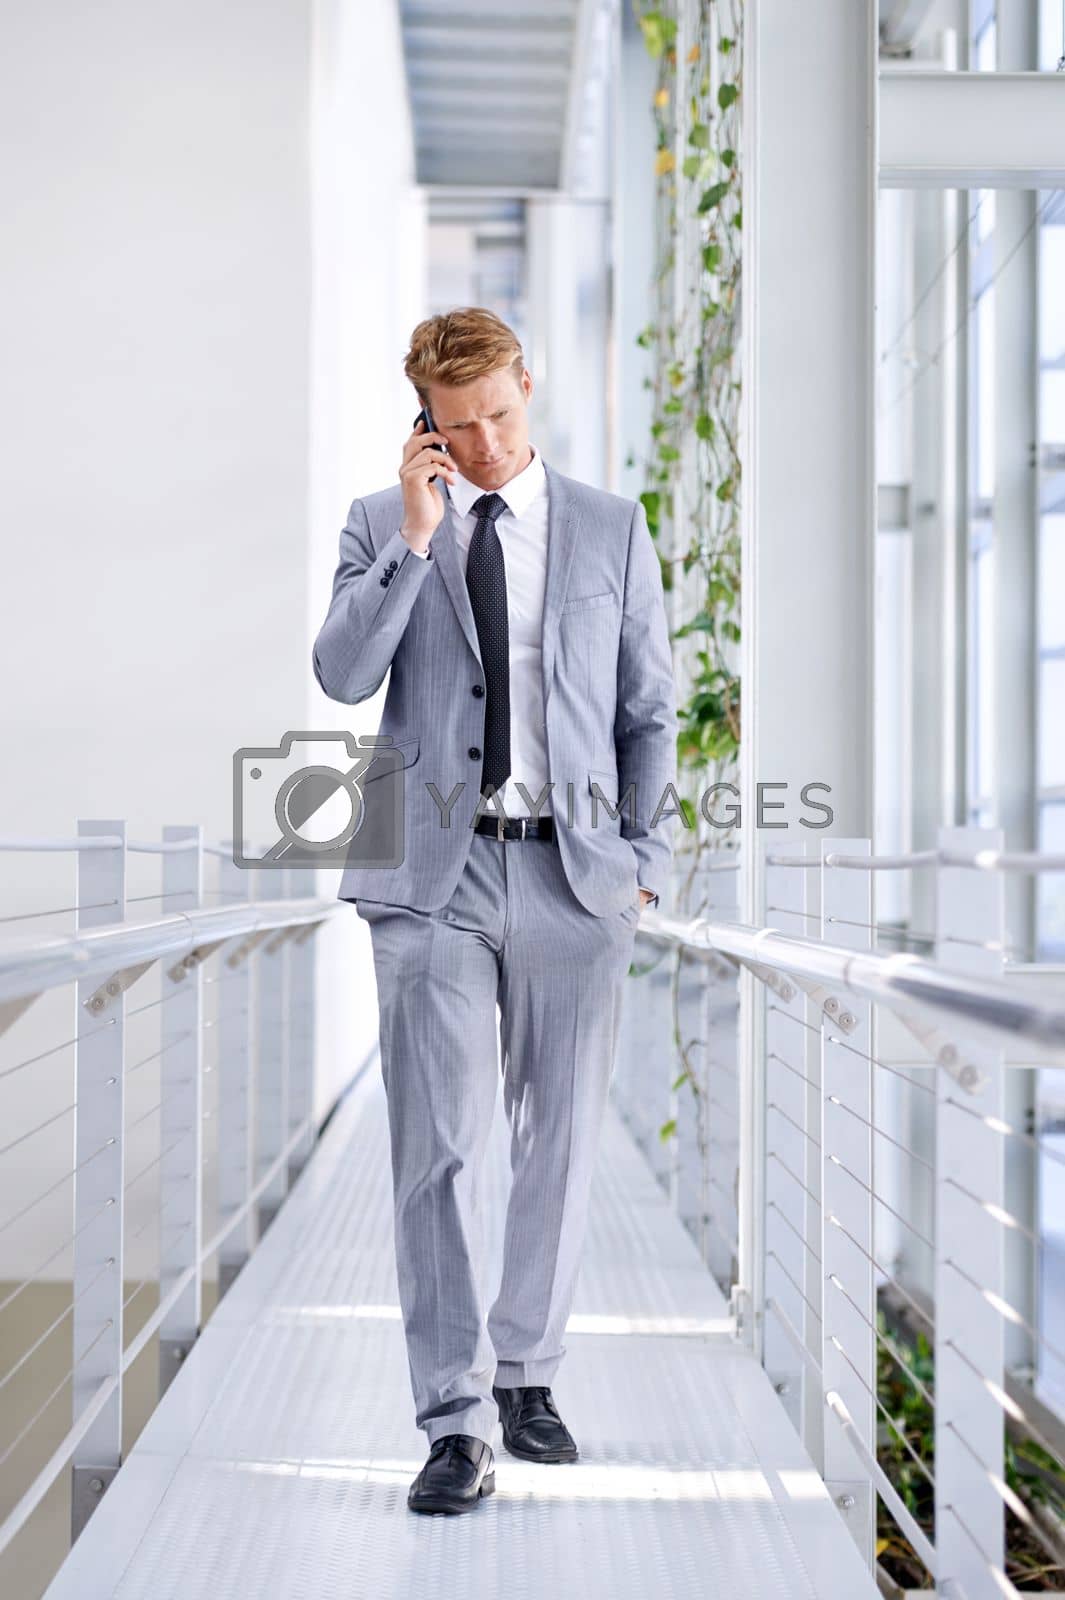 Royalty free image of Connecting with a client. Full length image of a handsome businessman talking on a cellphone. by YuriArcurs